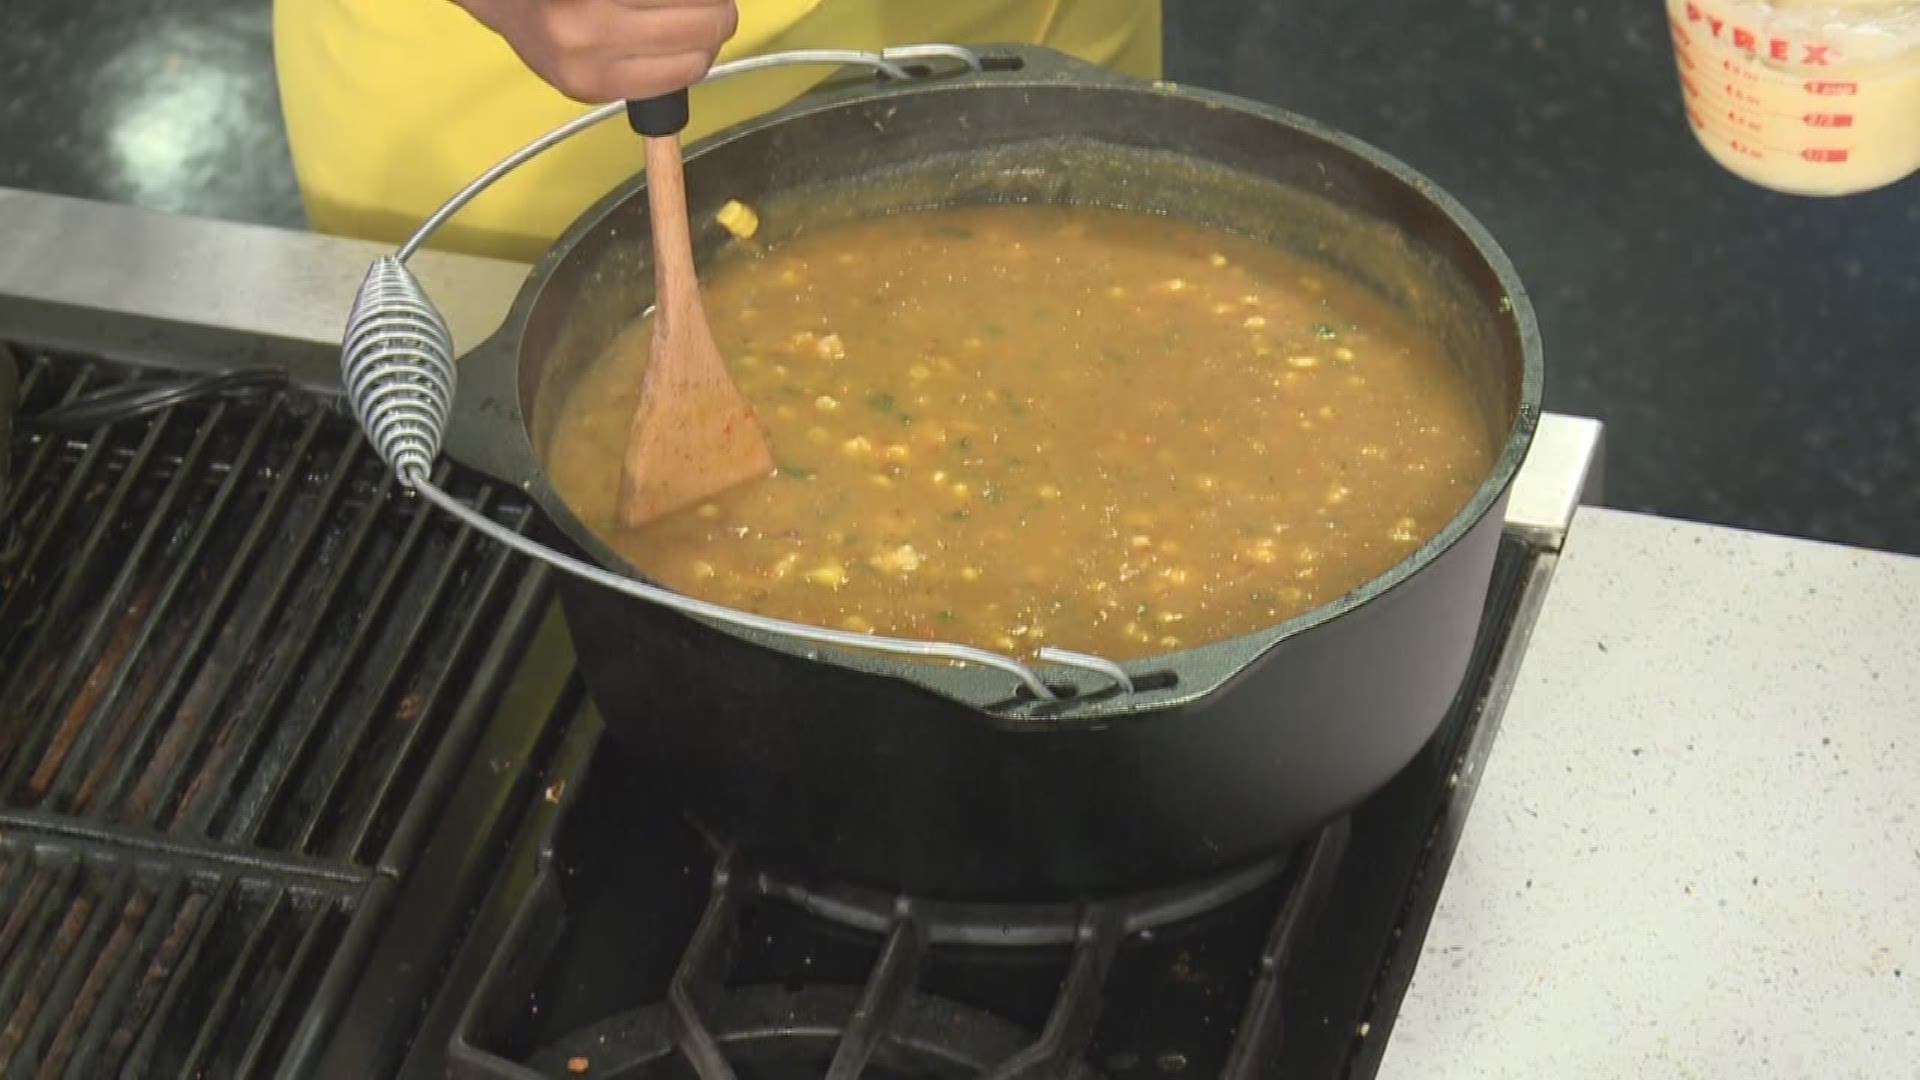 Chef Kevin Belton shows us how to make a cheesy corn and potato chowder.